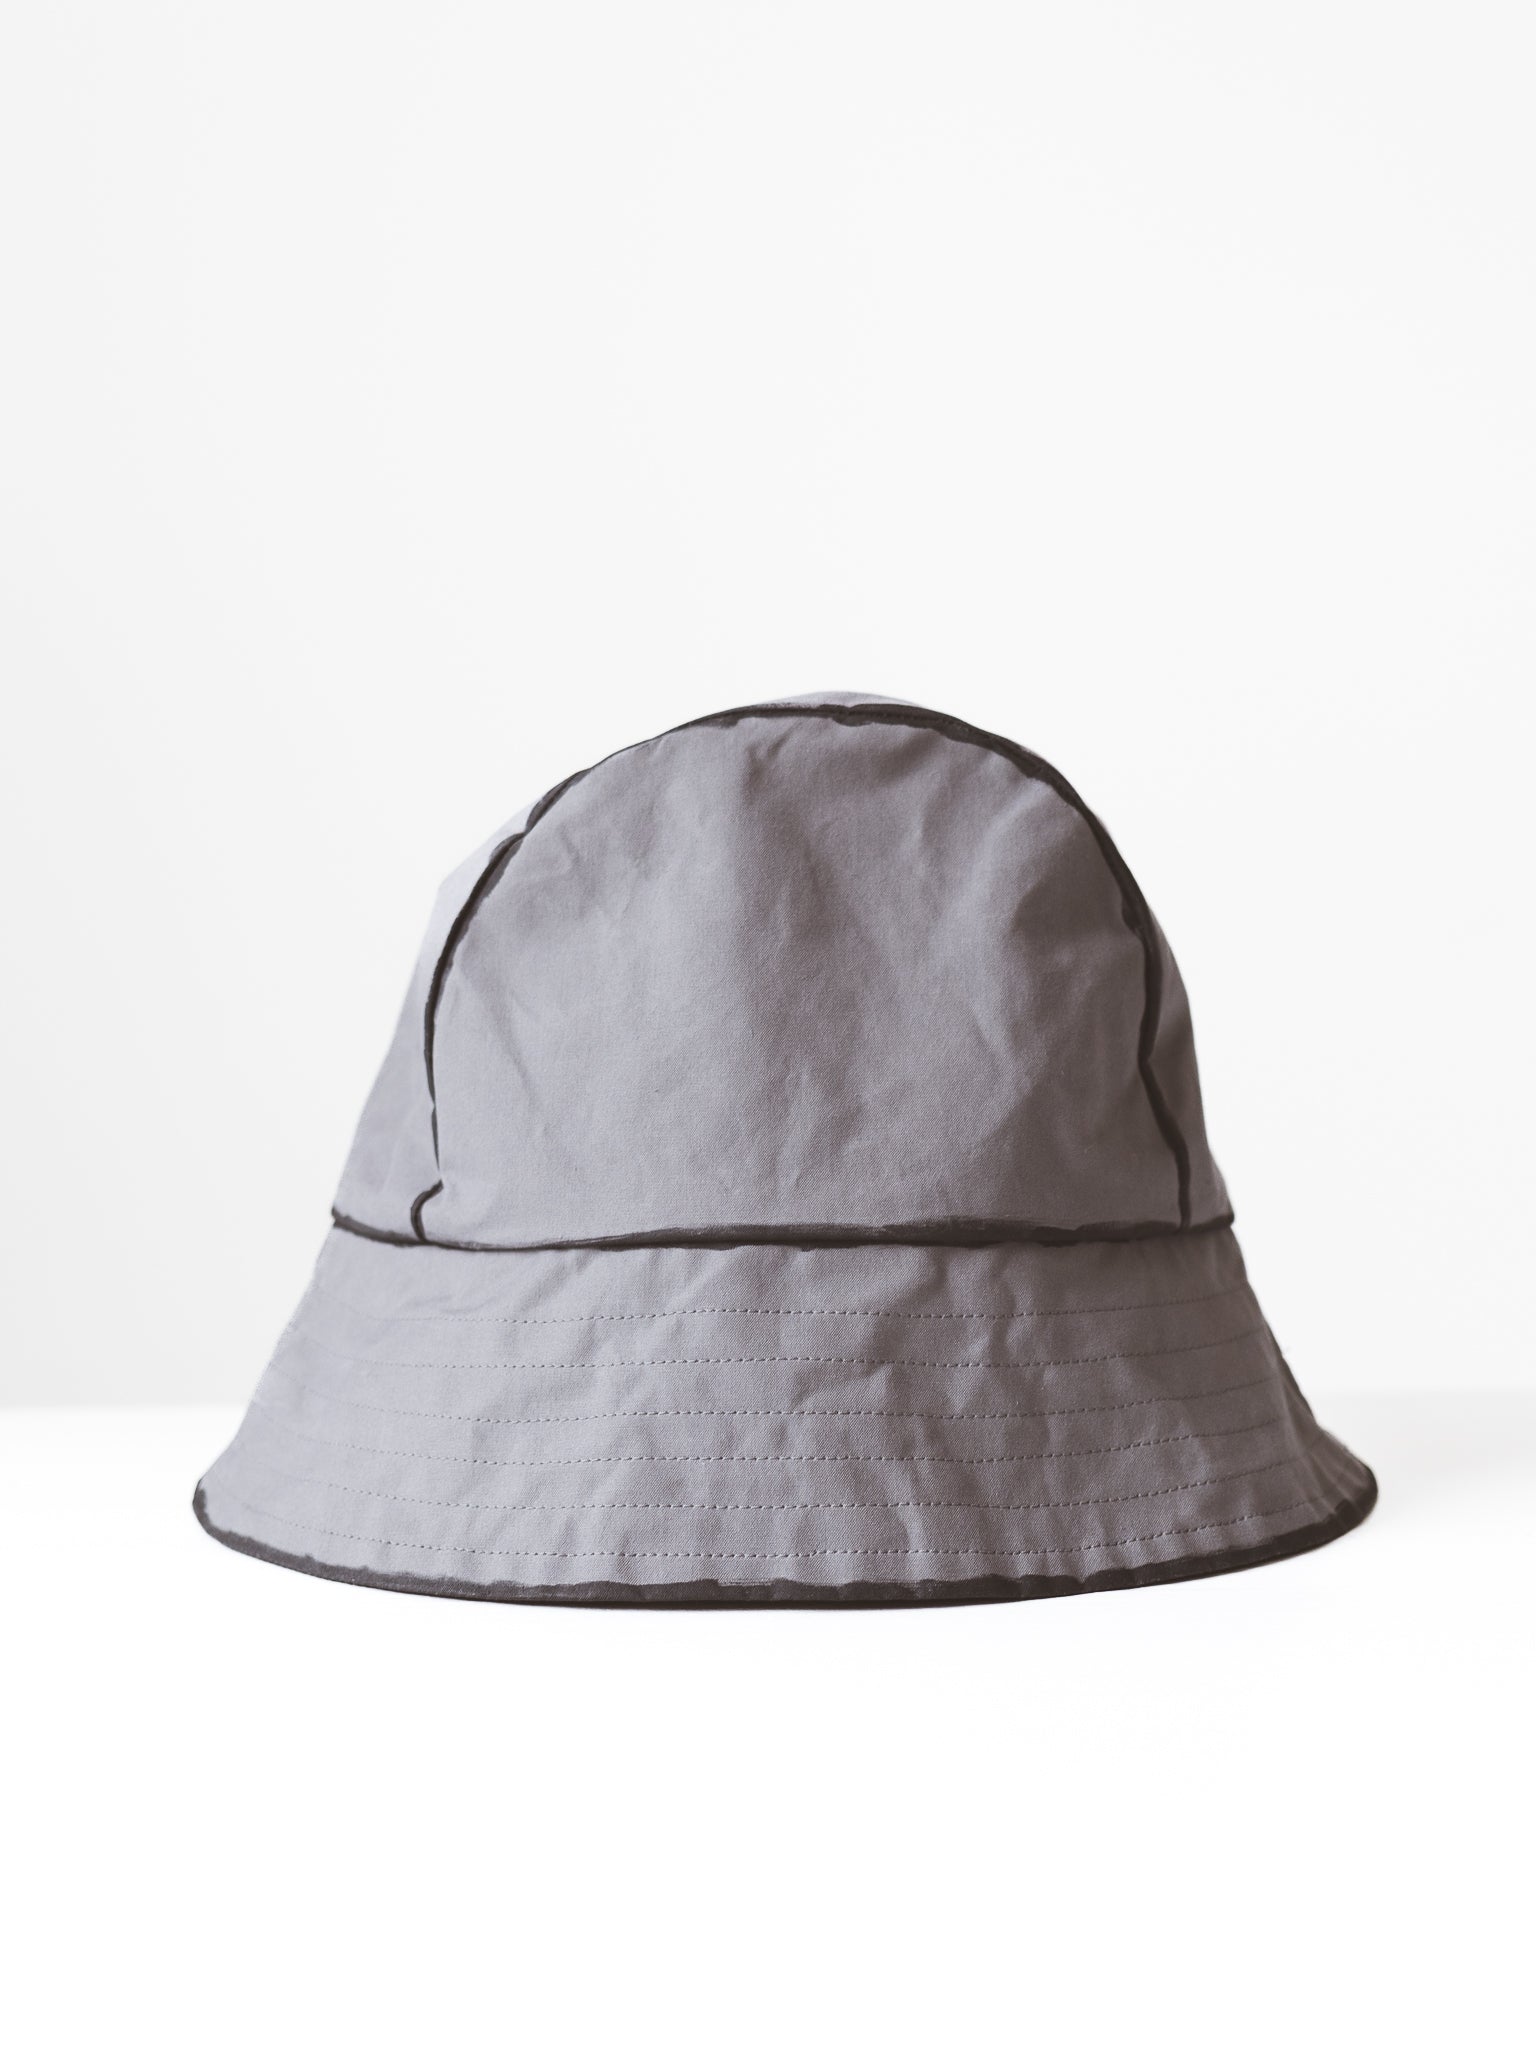 Denisa Check Bucket Fishing Hat by Seeberger Col. Grey, Size One Size